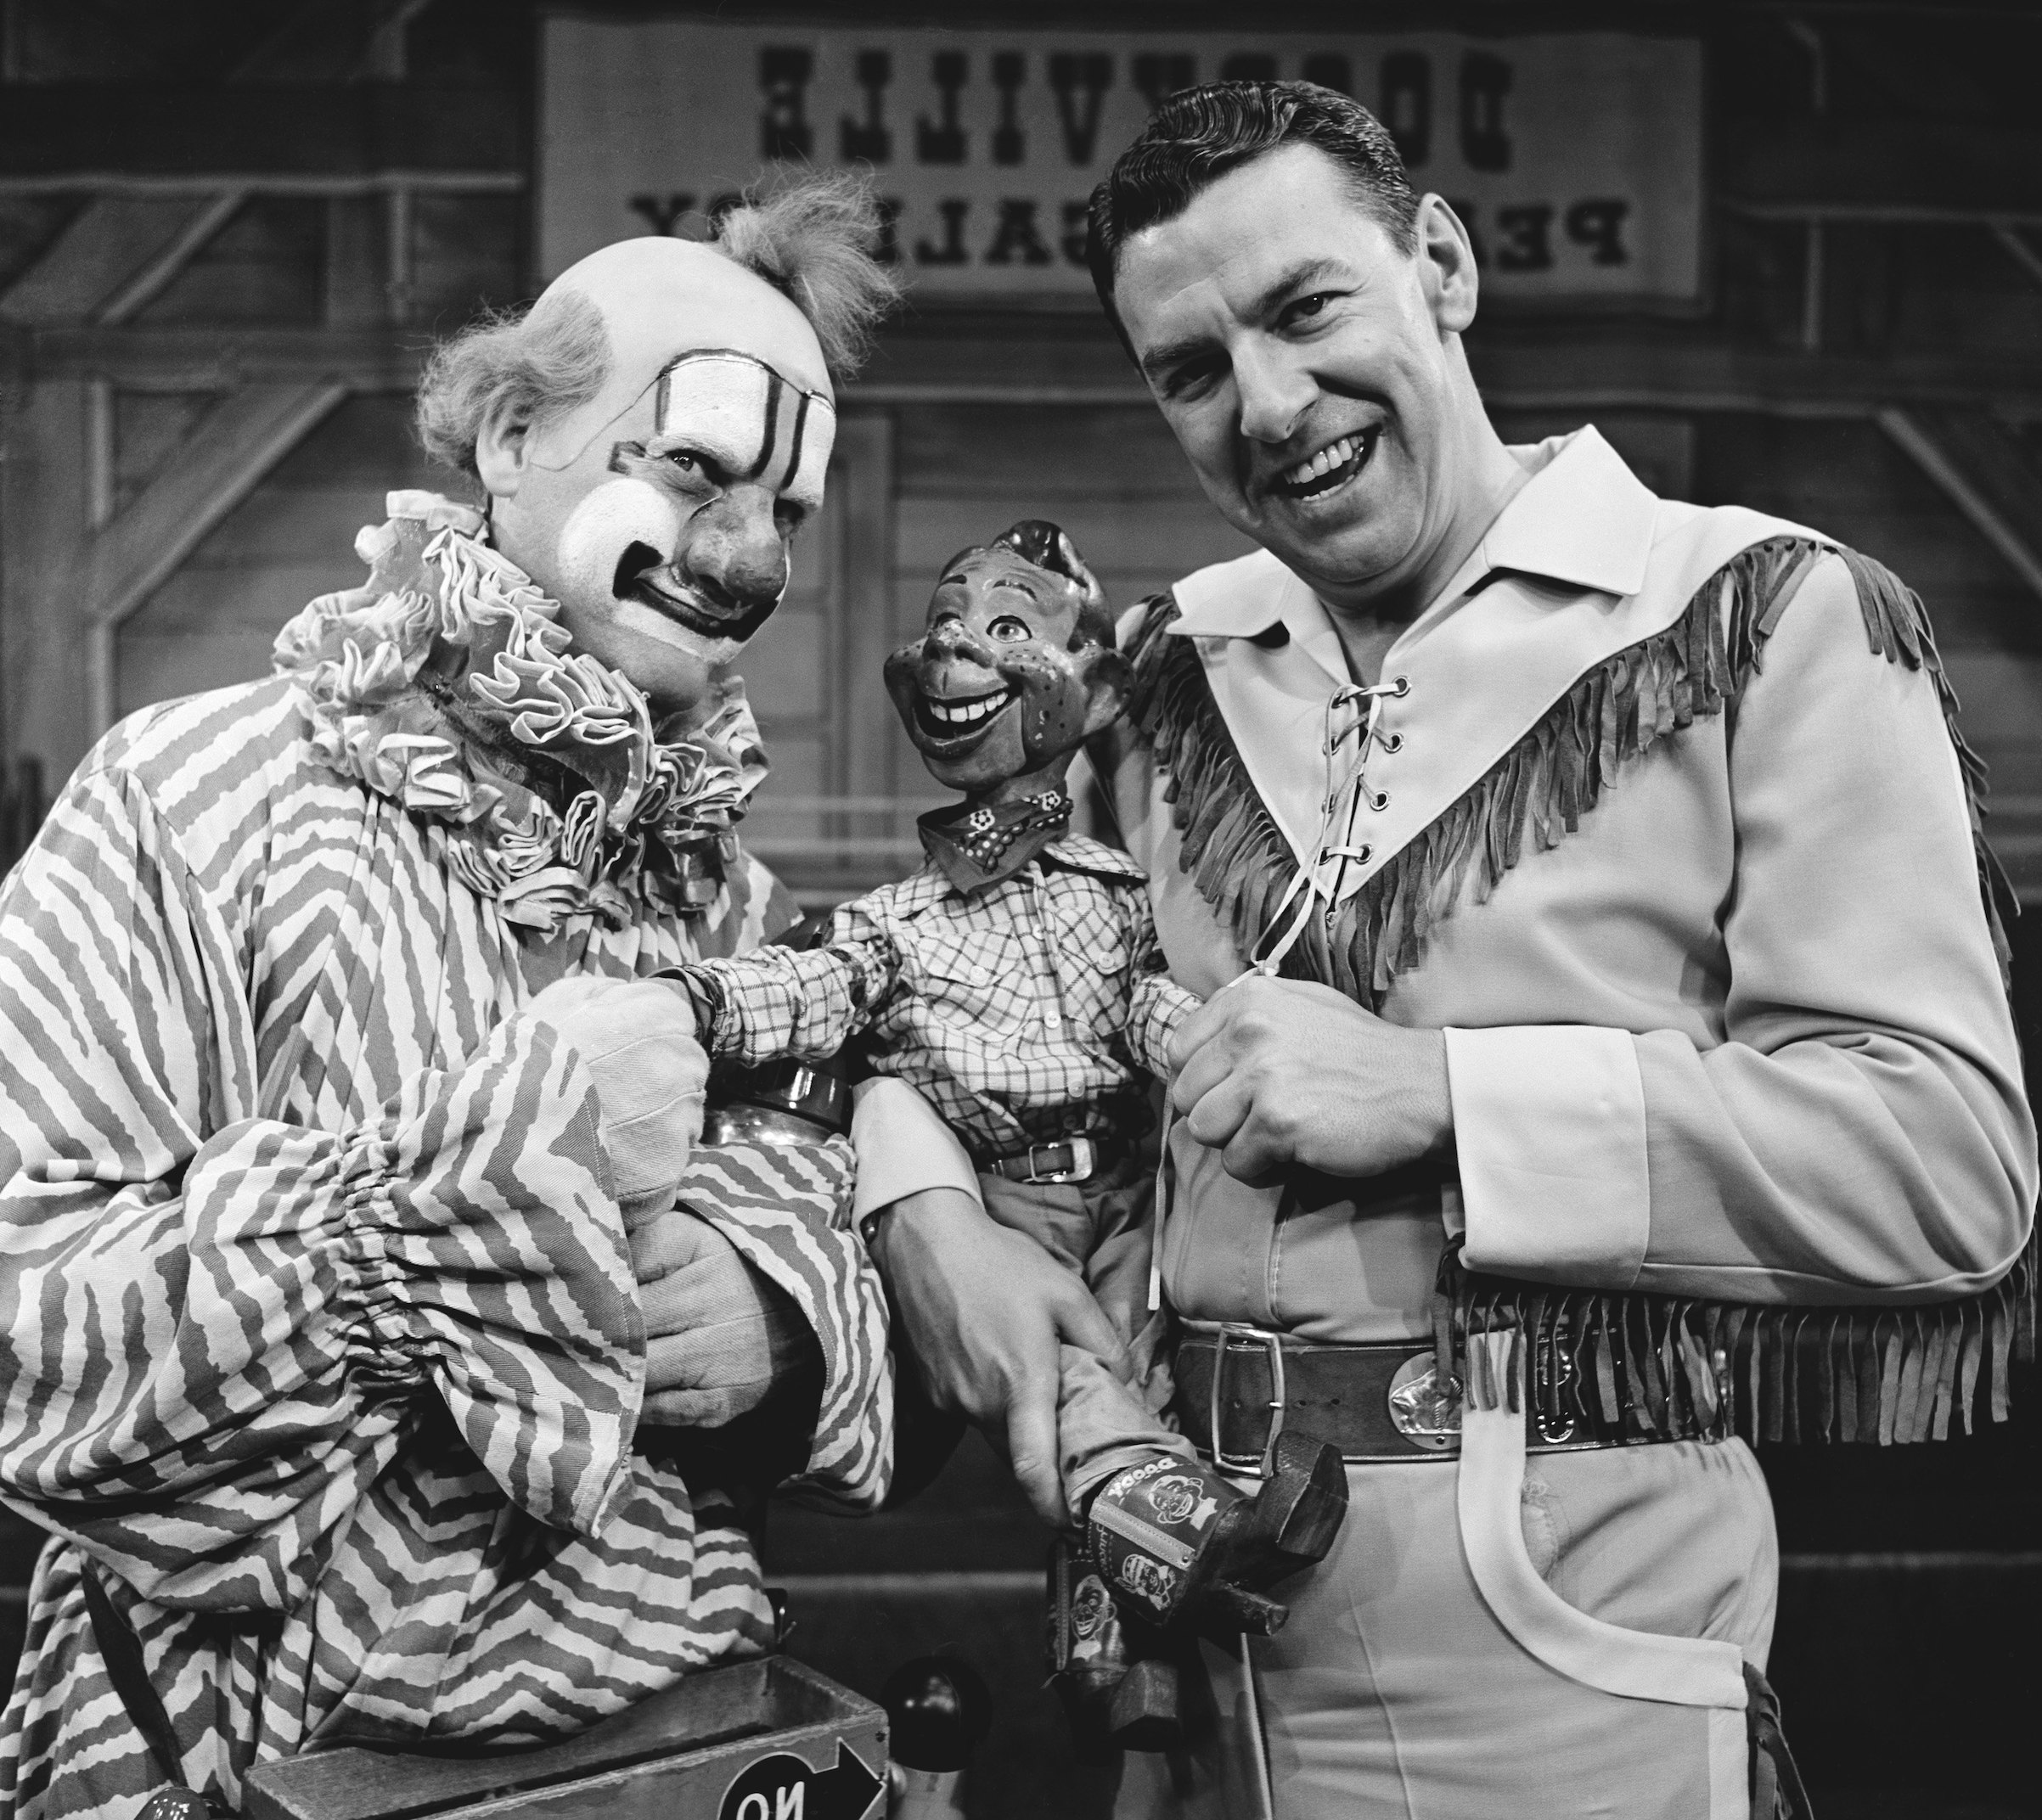 Pictured: (l-r) Lew Anderson as Clarabell the Clown, Howdy Doody, Bob Smith as Buffalo Bob Smith (NBC/Getty Images)